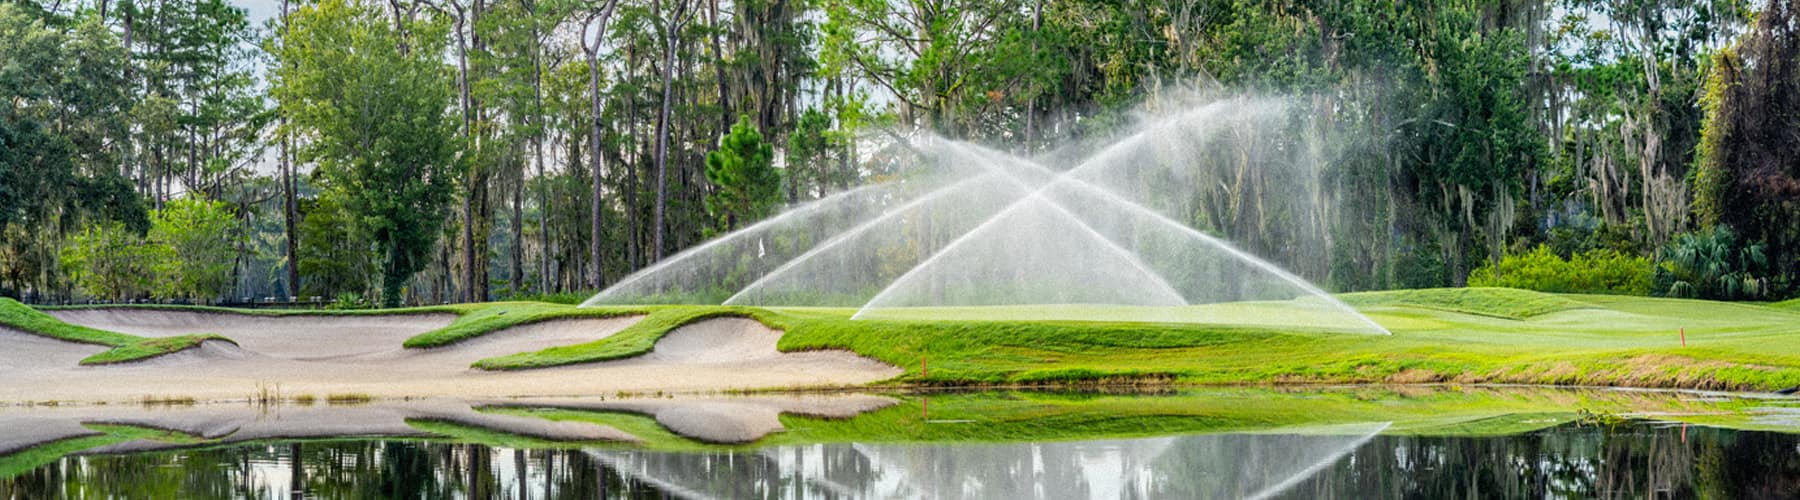 The Lake Nona golf course with Rain Bird sprinklers spraying water over the grass.